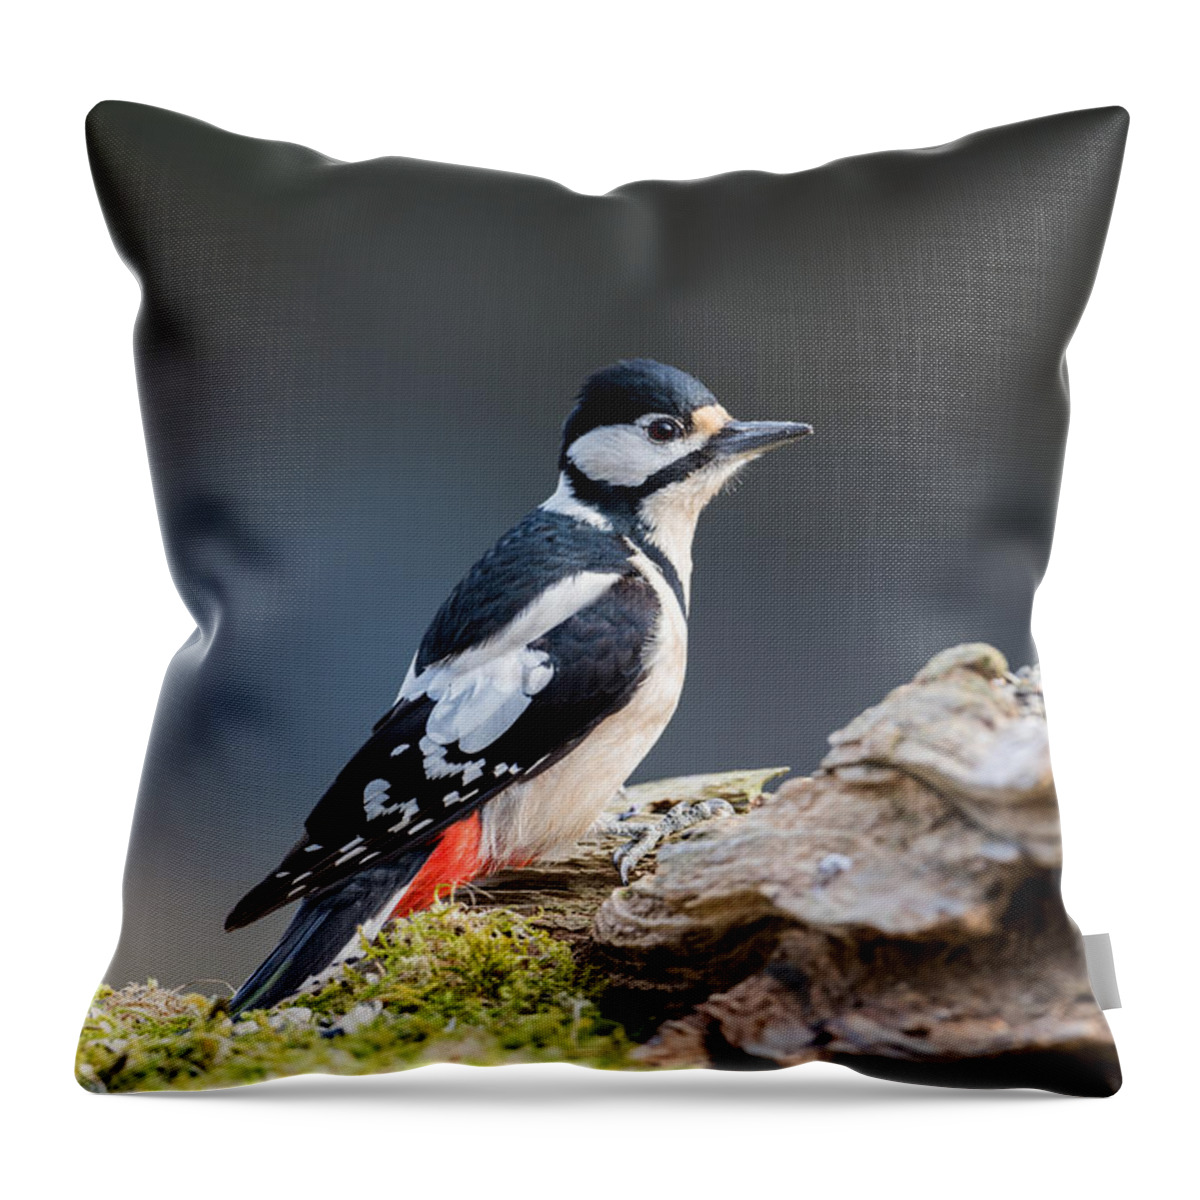 Miss Woodpecker Throw Pillow featuring the photograph Miss Woodpecker by Torbjorn Swenelius